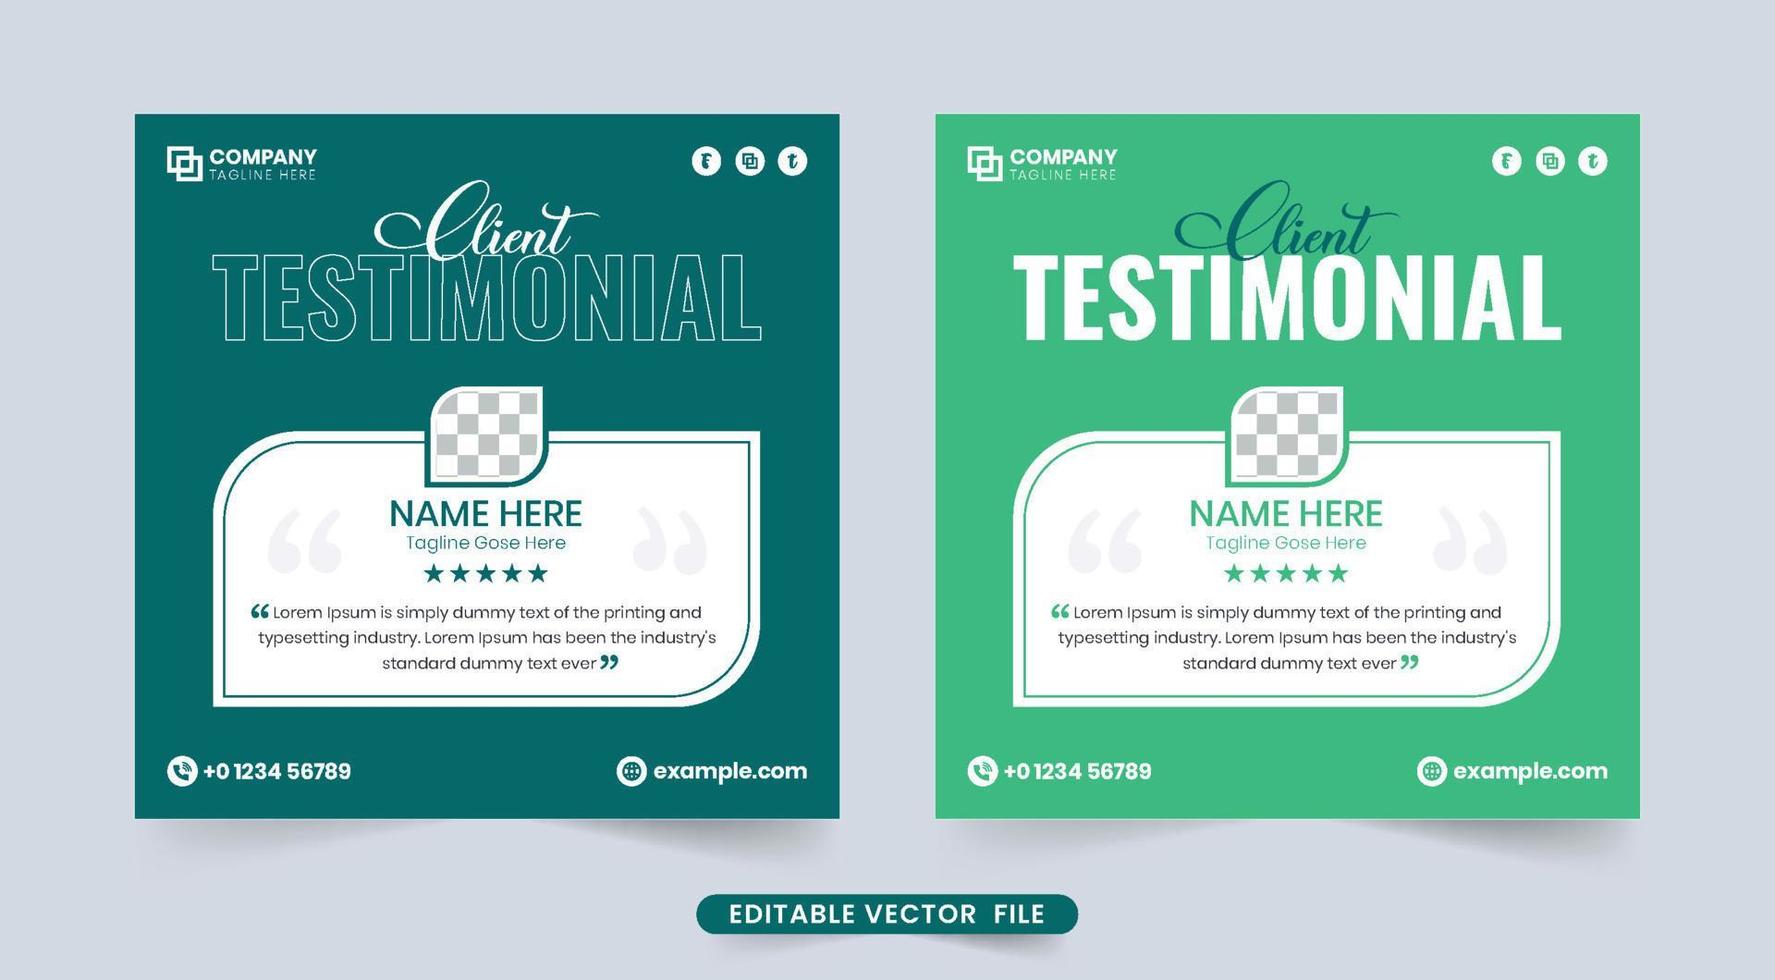 Customer work review section and testimonial vector with creative shapes. Client testimonials and feedback sections are designed with green backgrounds. Customer service feedback layout vector.